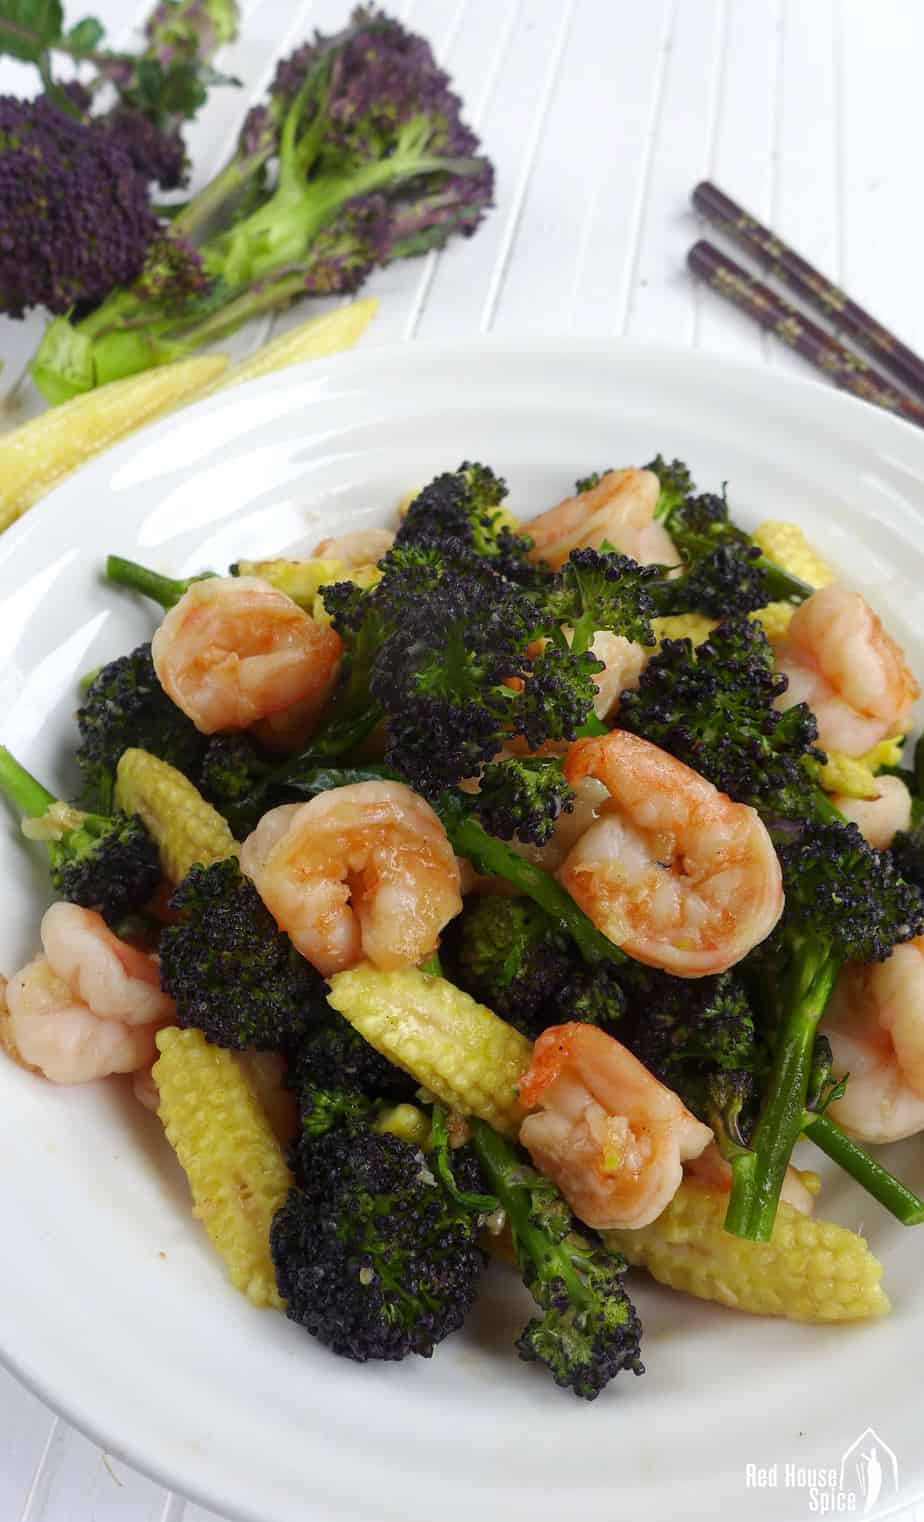 Fresh, crunchy, healthy and very easy to cook, purple sprouting broccoli and prawn stir-fry is a great seasonal dish to try.